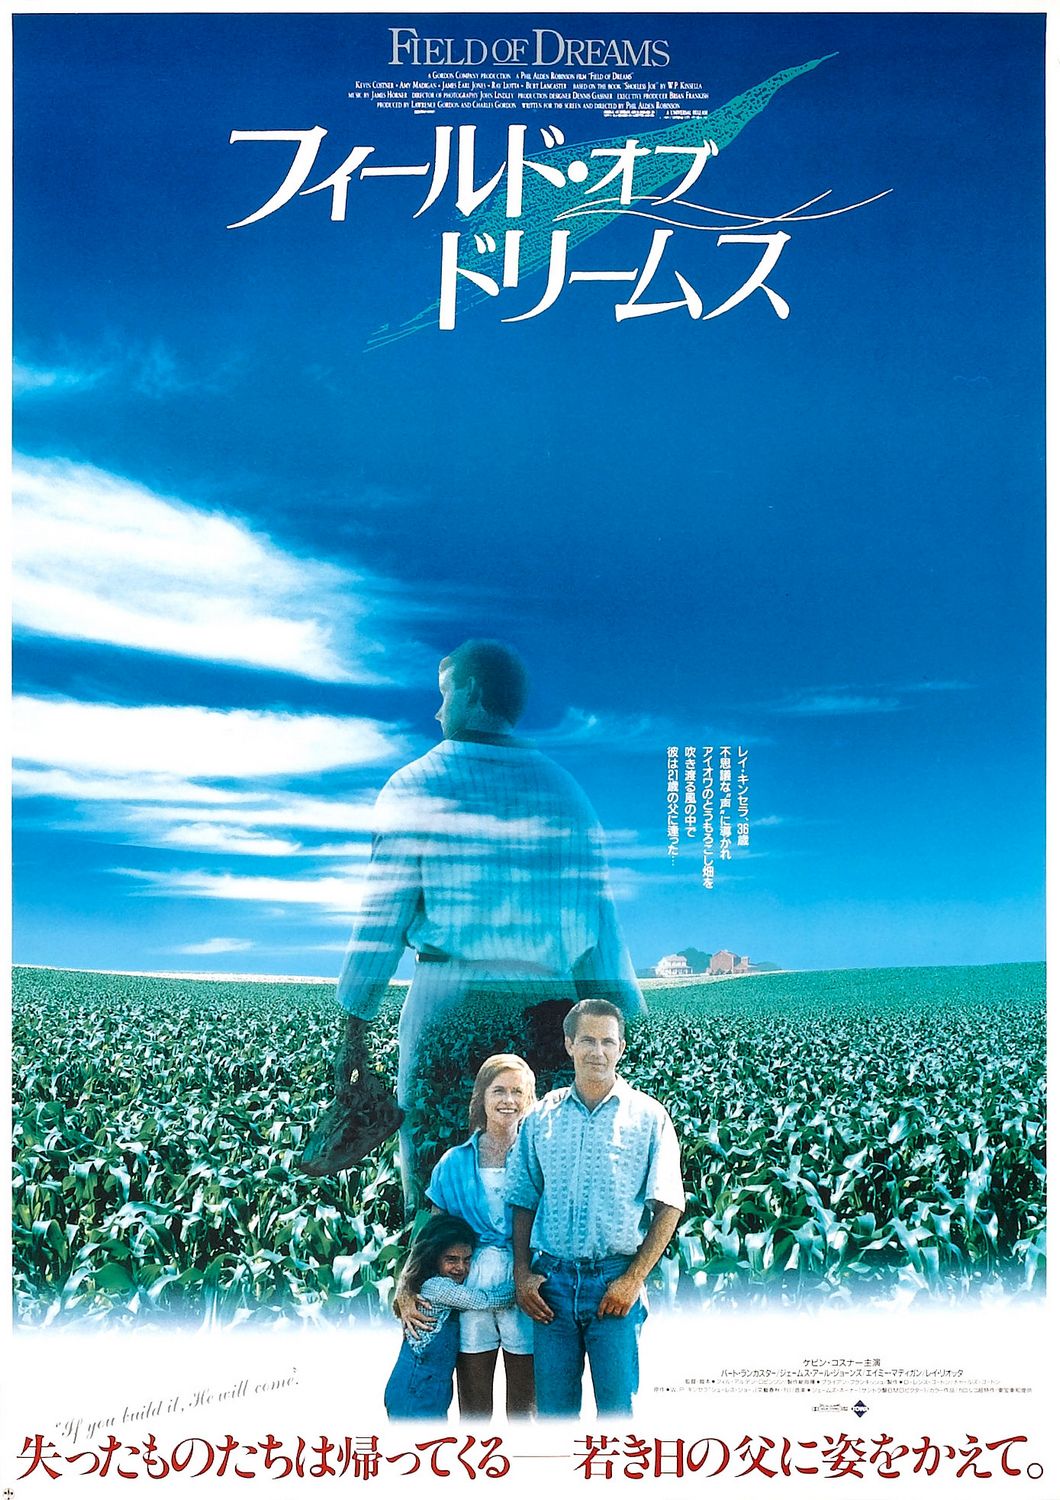 YARN, Maybe this is heaven., Field of Dreams (1989)